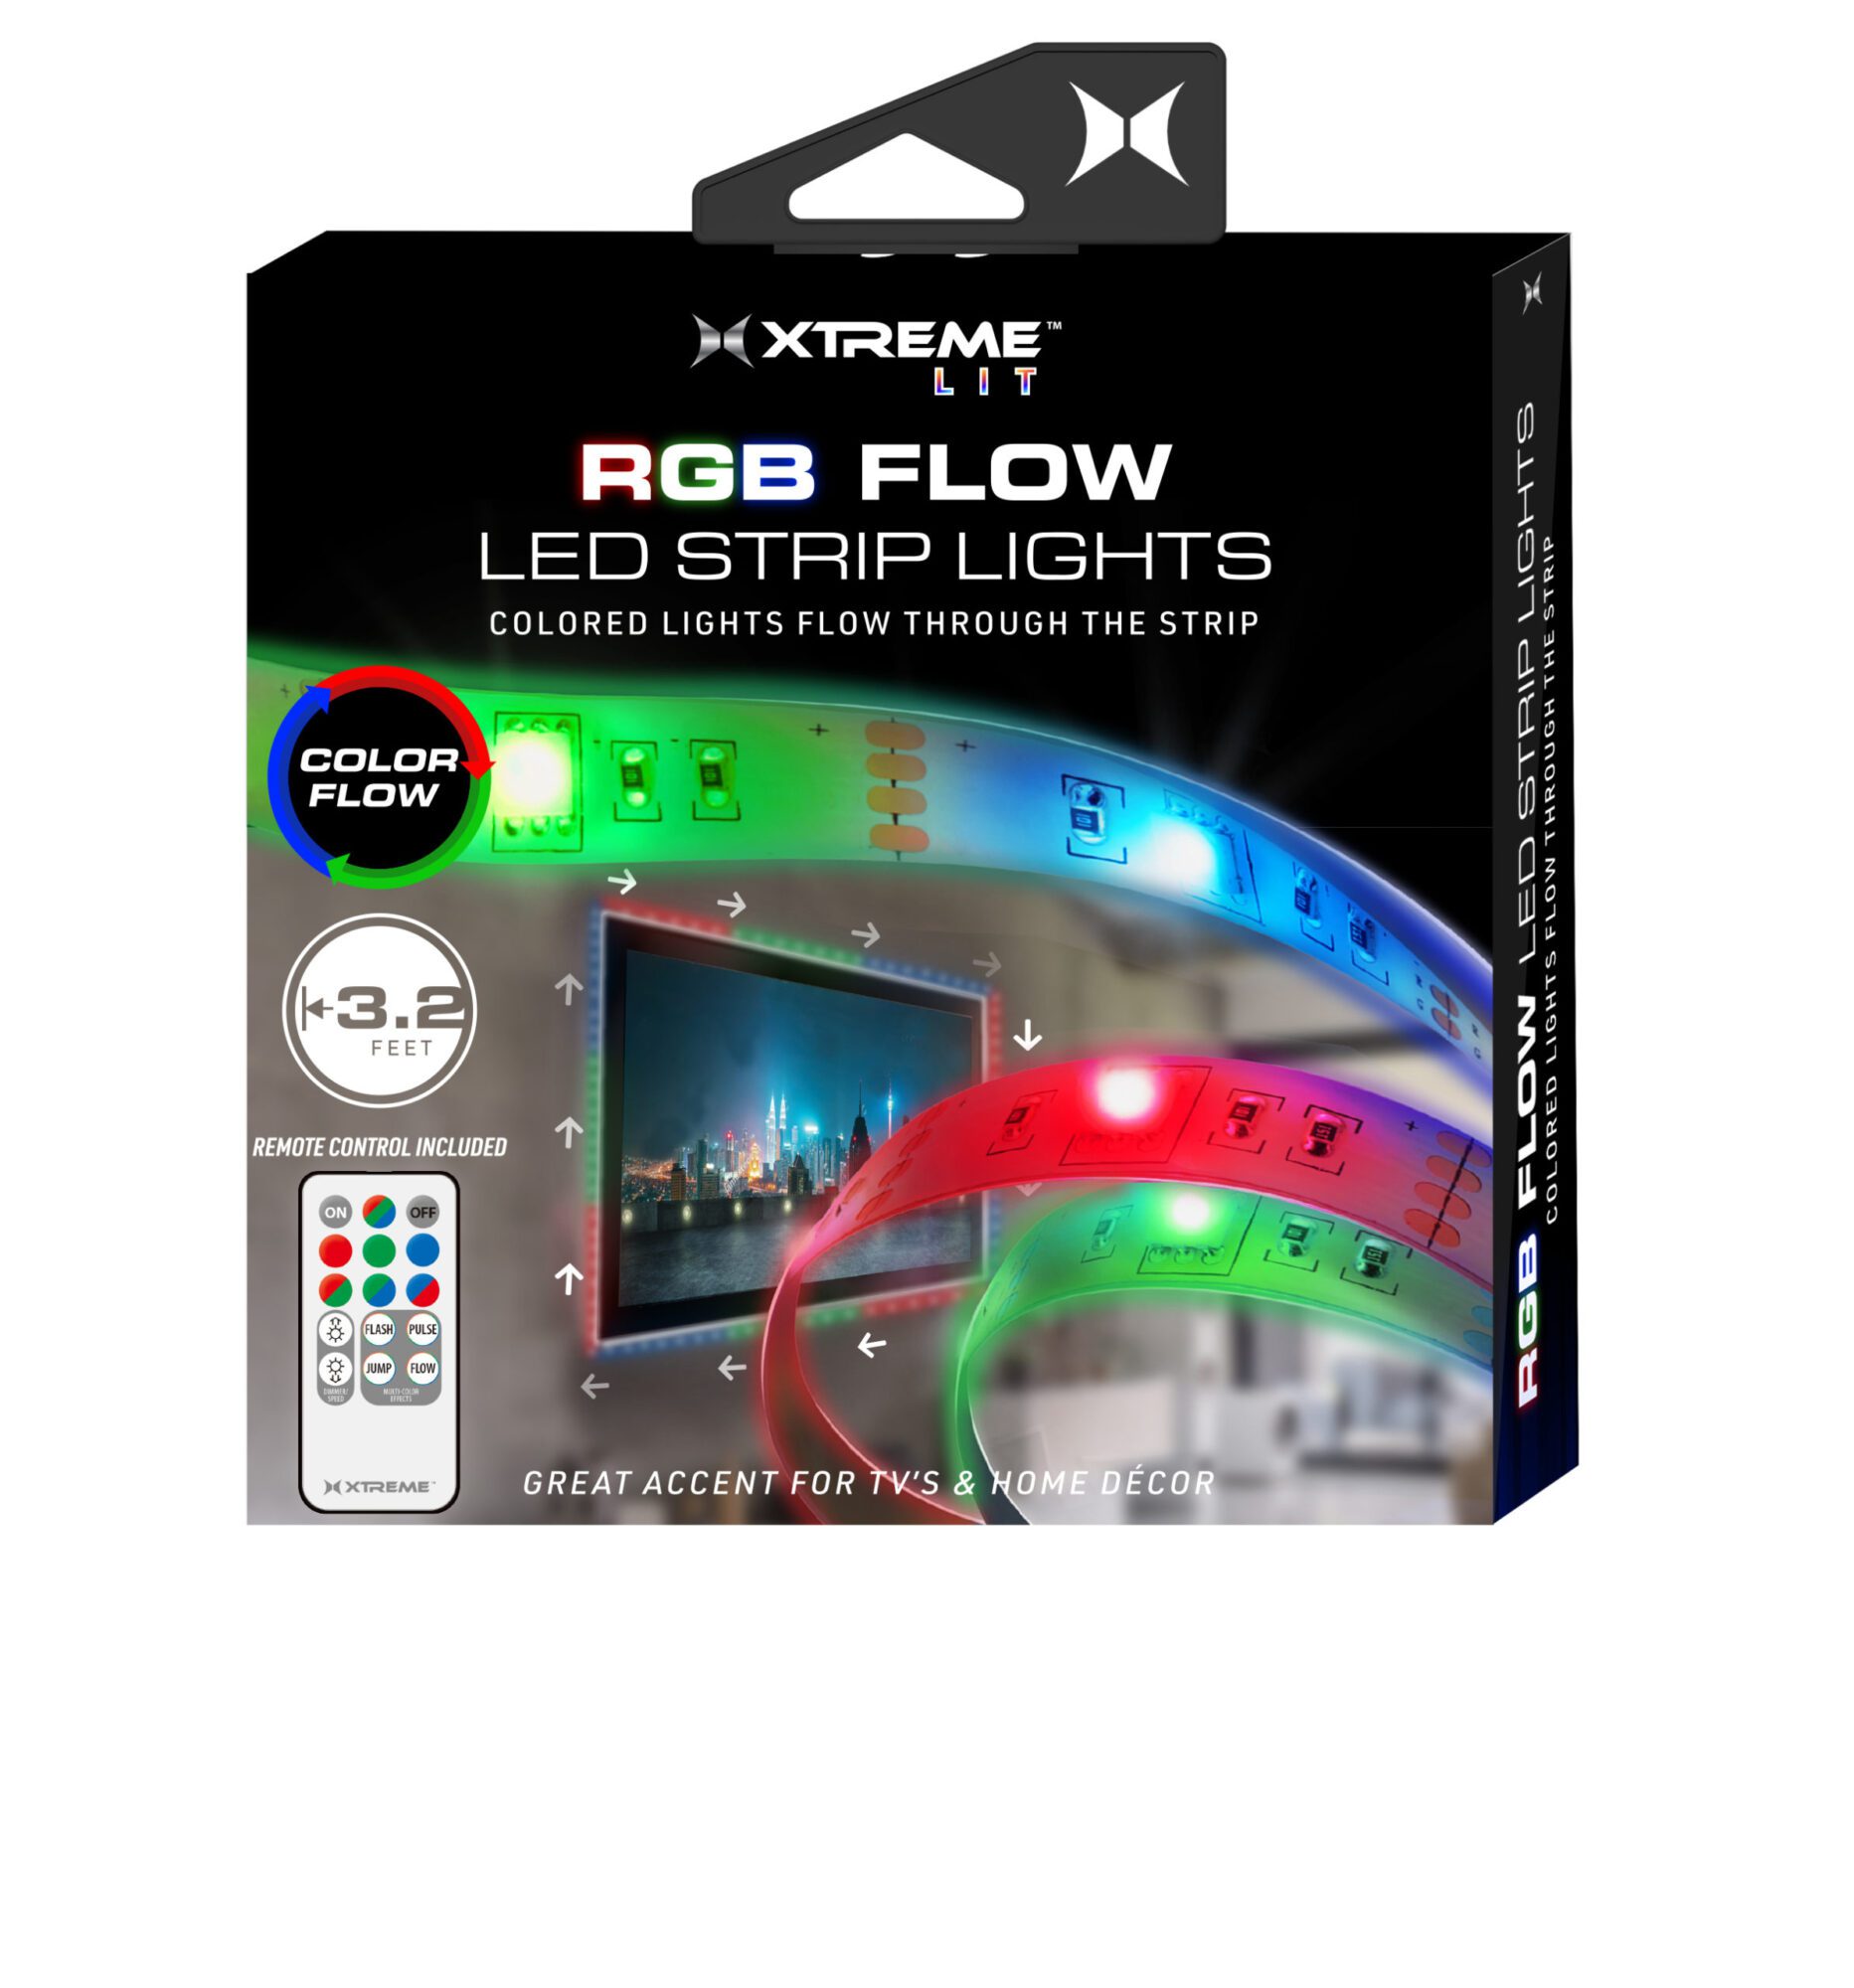 3.2 ft RGB Flow LED Strip Lights with Color Flow, with remote control - Xtreme